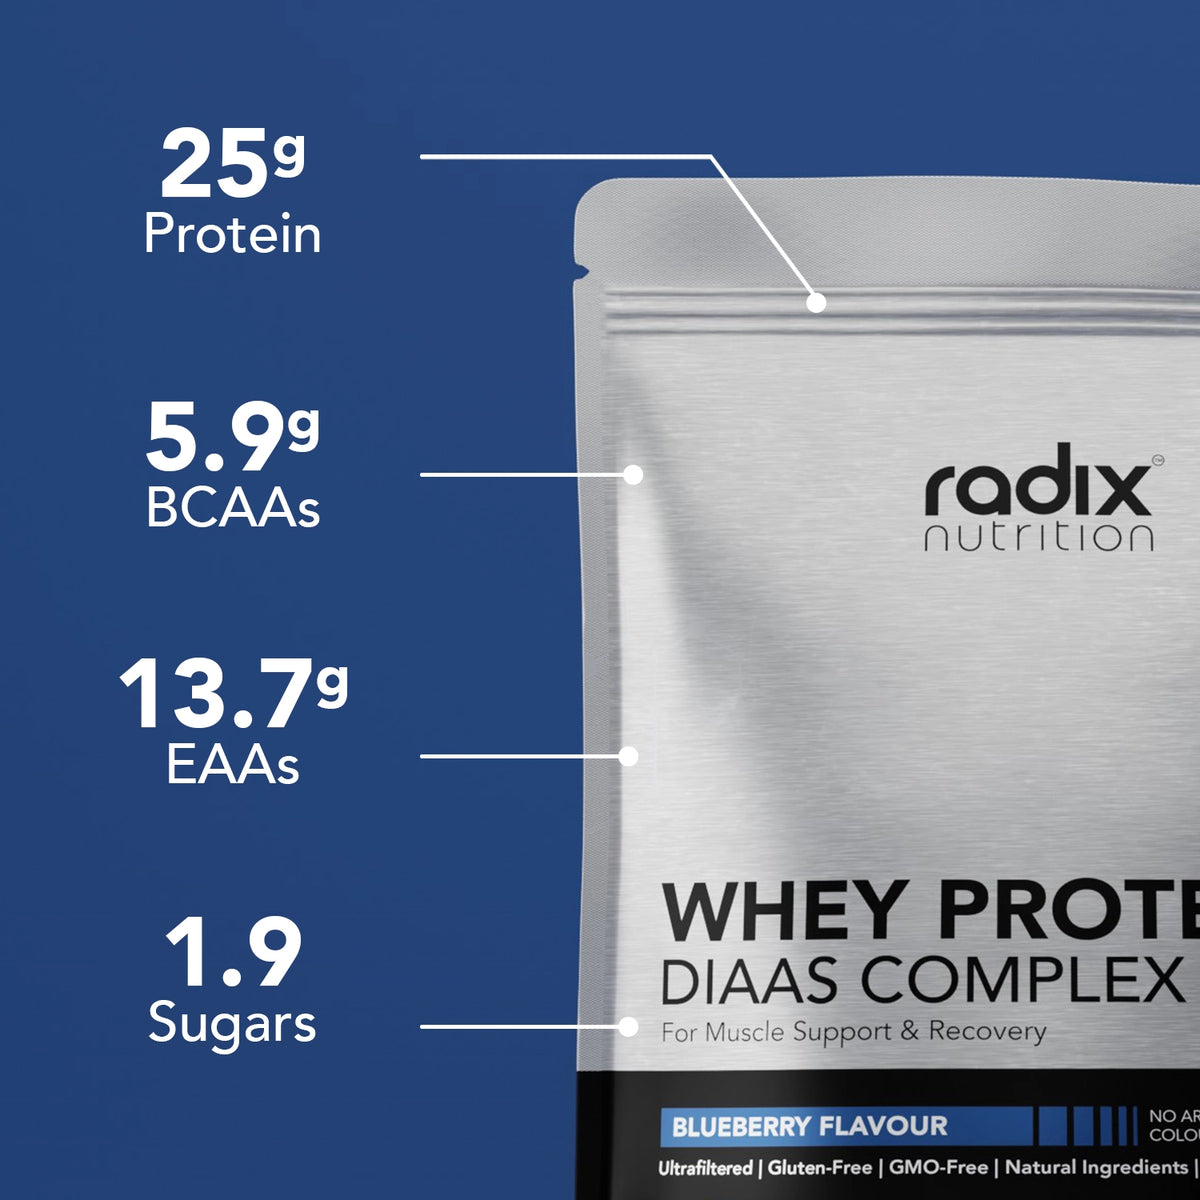 Whey Protein DIAAS Complex 1.61 - 1kg Bag / Blueberry